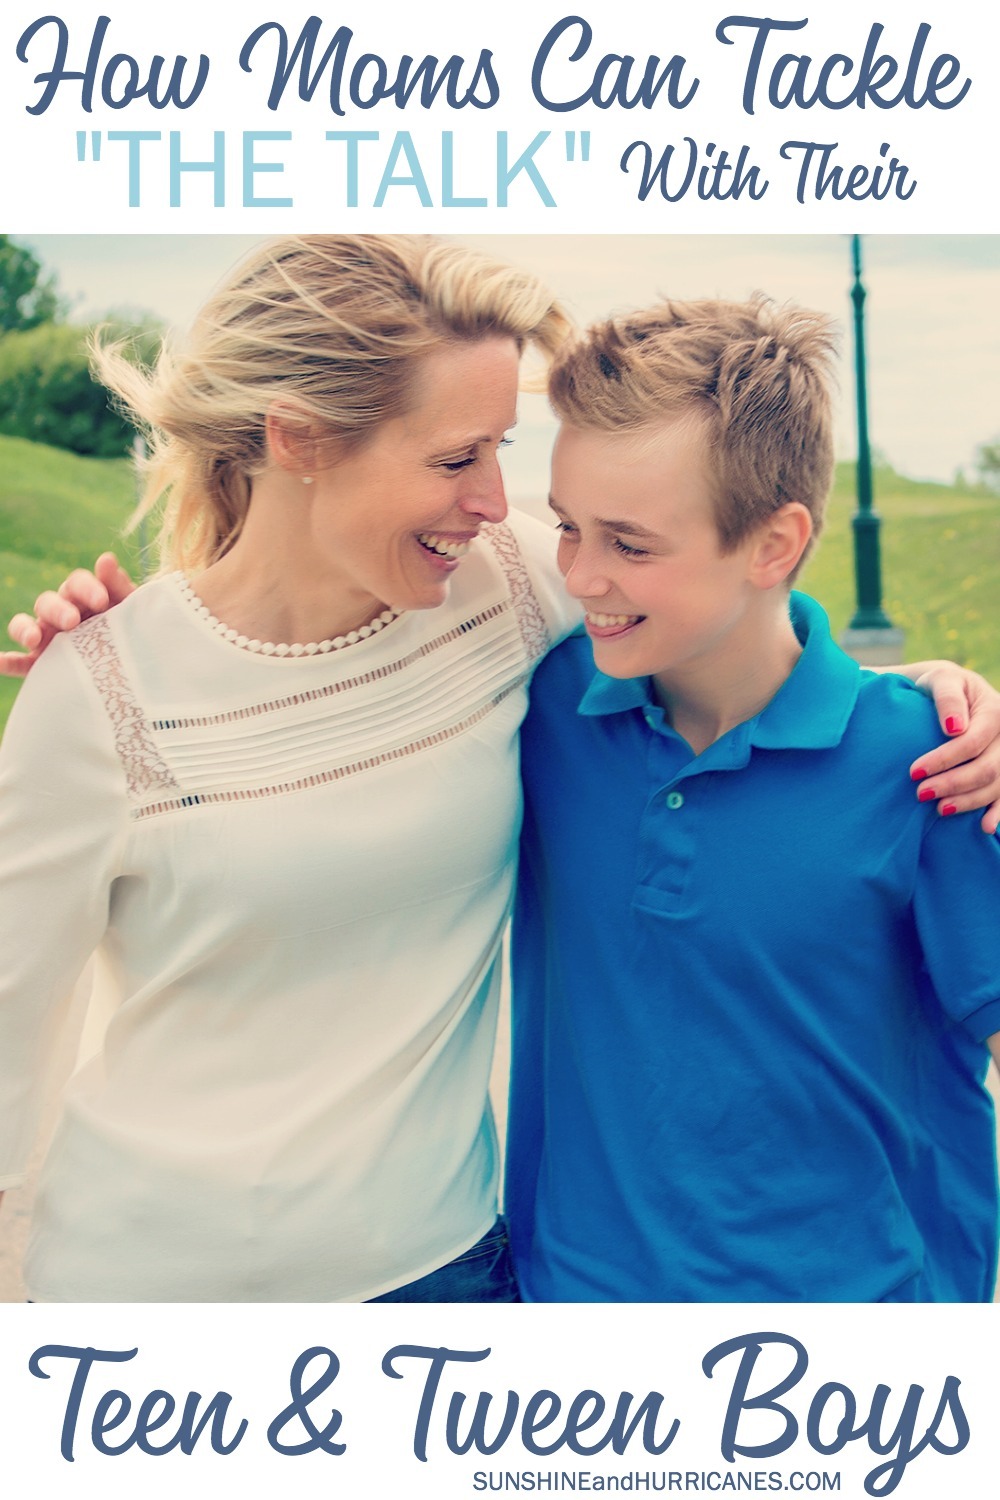 How moms can tackle THE TALK with their tween and teen boys. Tips from the mom of four boys! SunshineandHurricanes.com